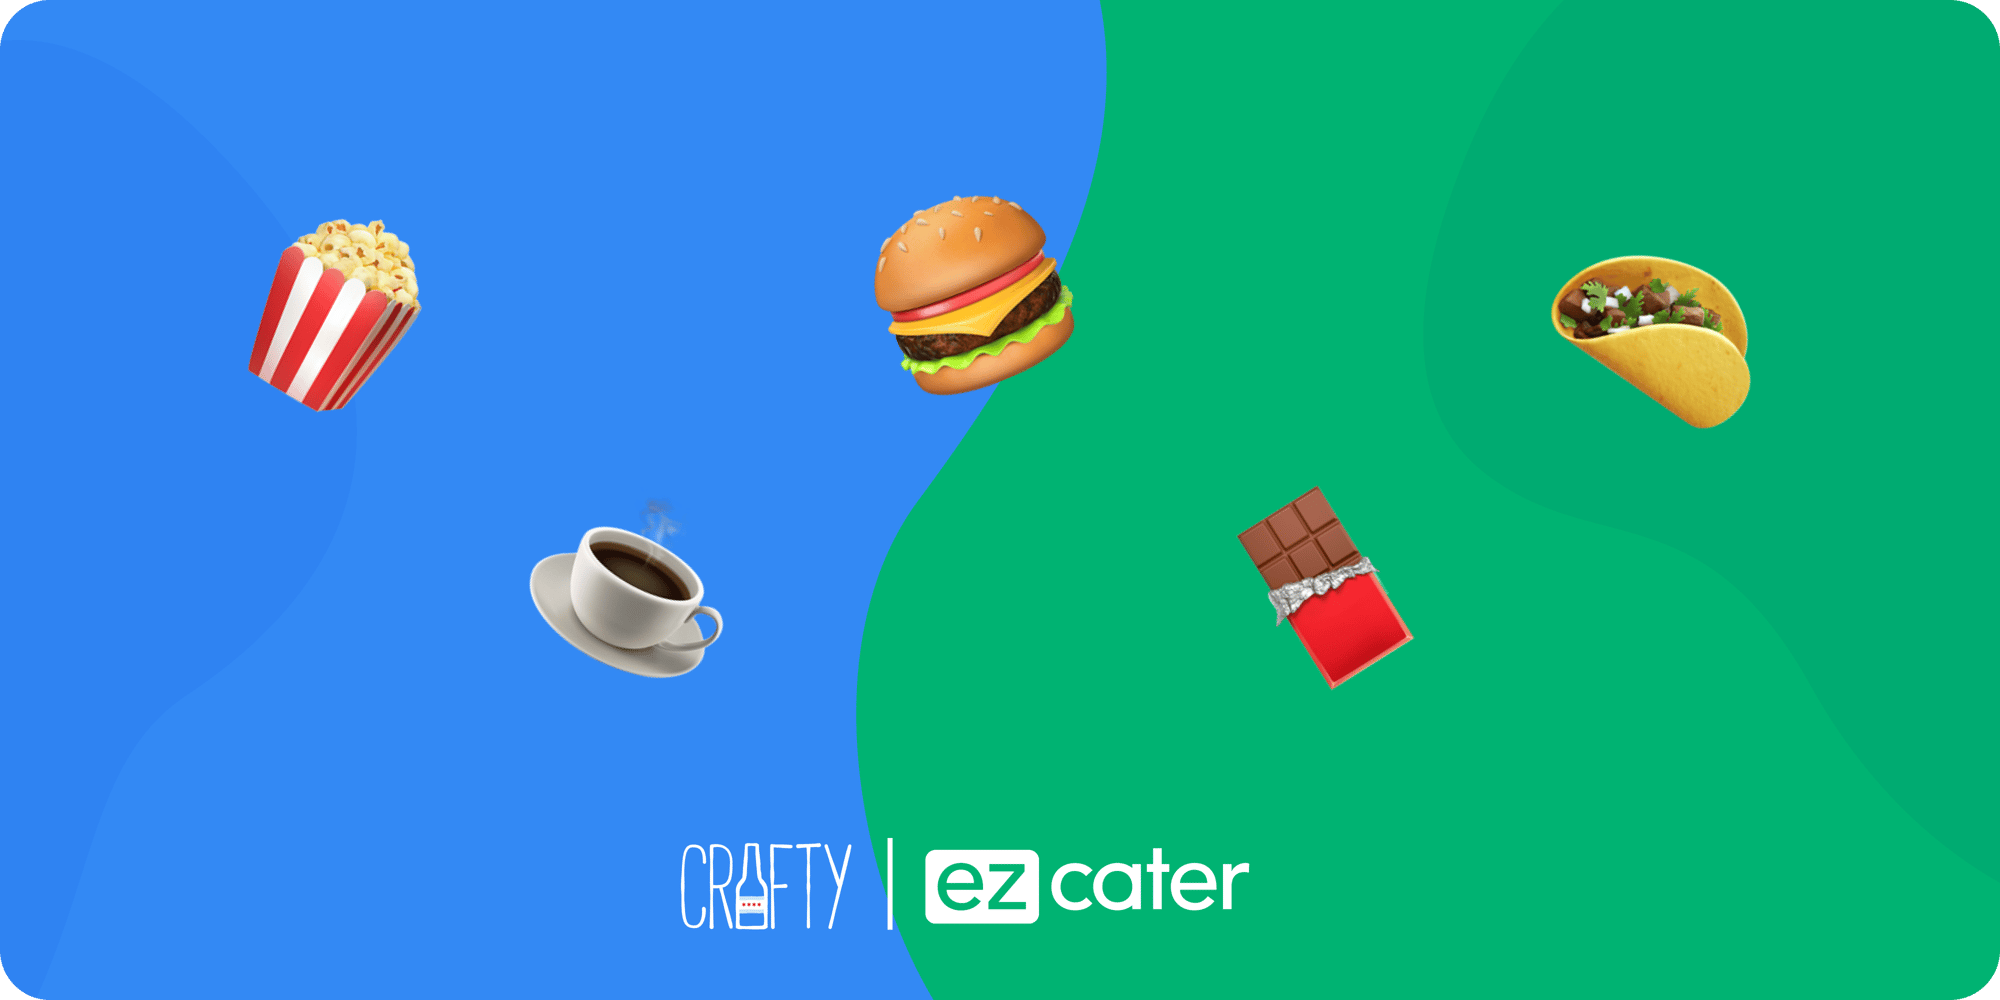 Crafty partners with ezCater to elevate office food service